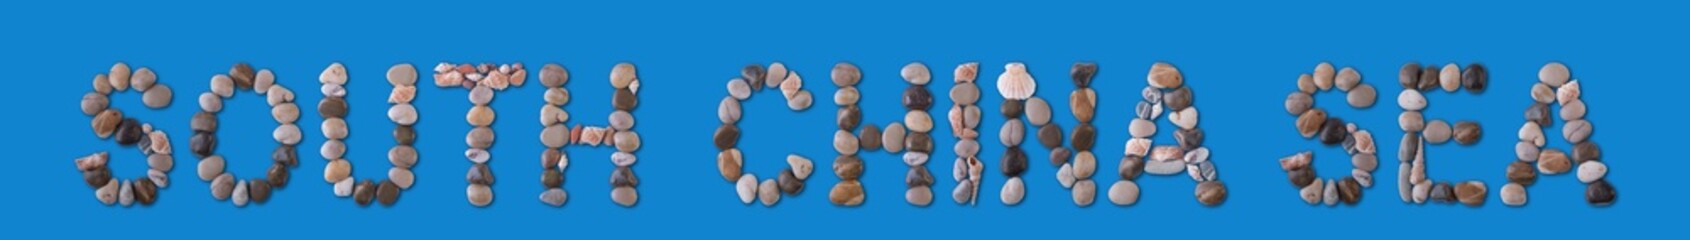 The geographical inscription “South China Sea” is lined with shells and stones of various shapes on a harmonious blue background. Water tourism, marine geology, study and ecology of the World Ocean